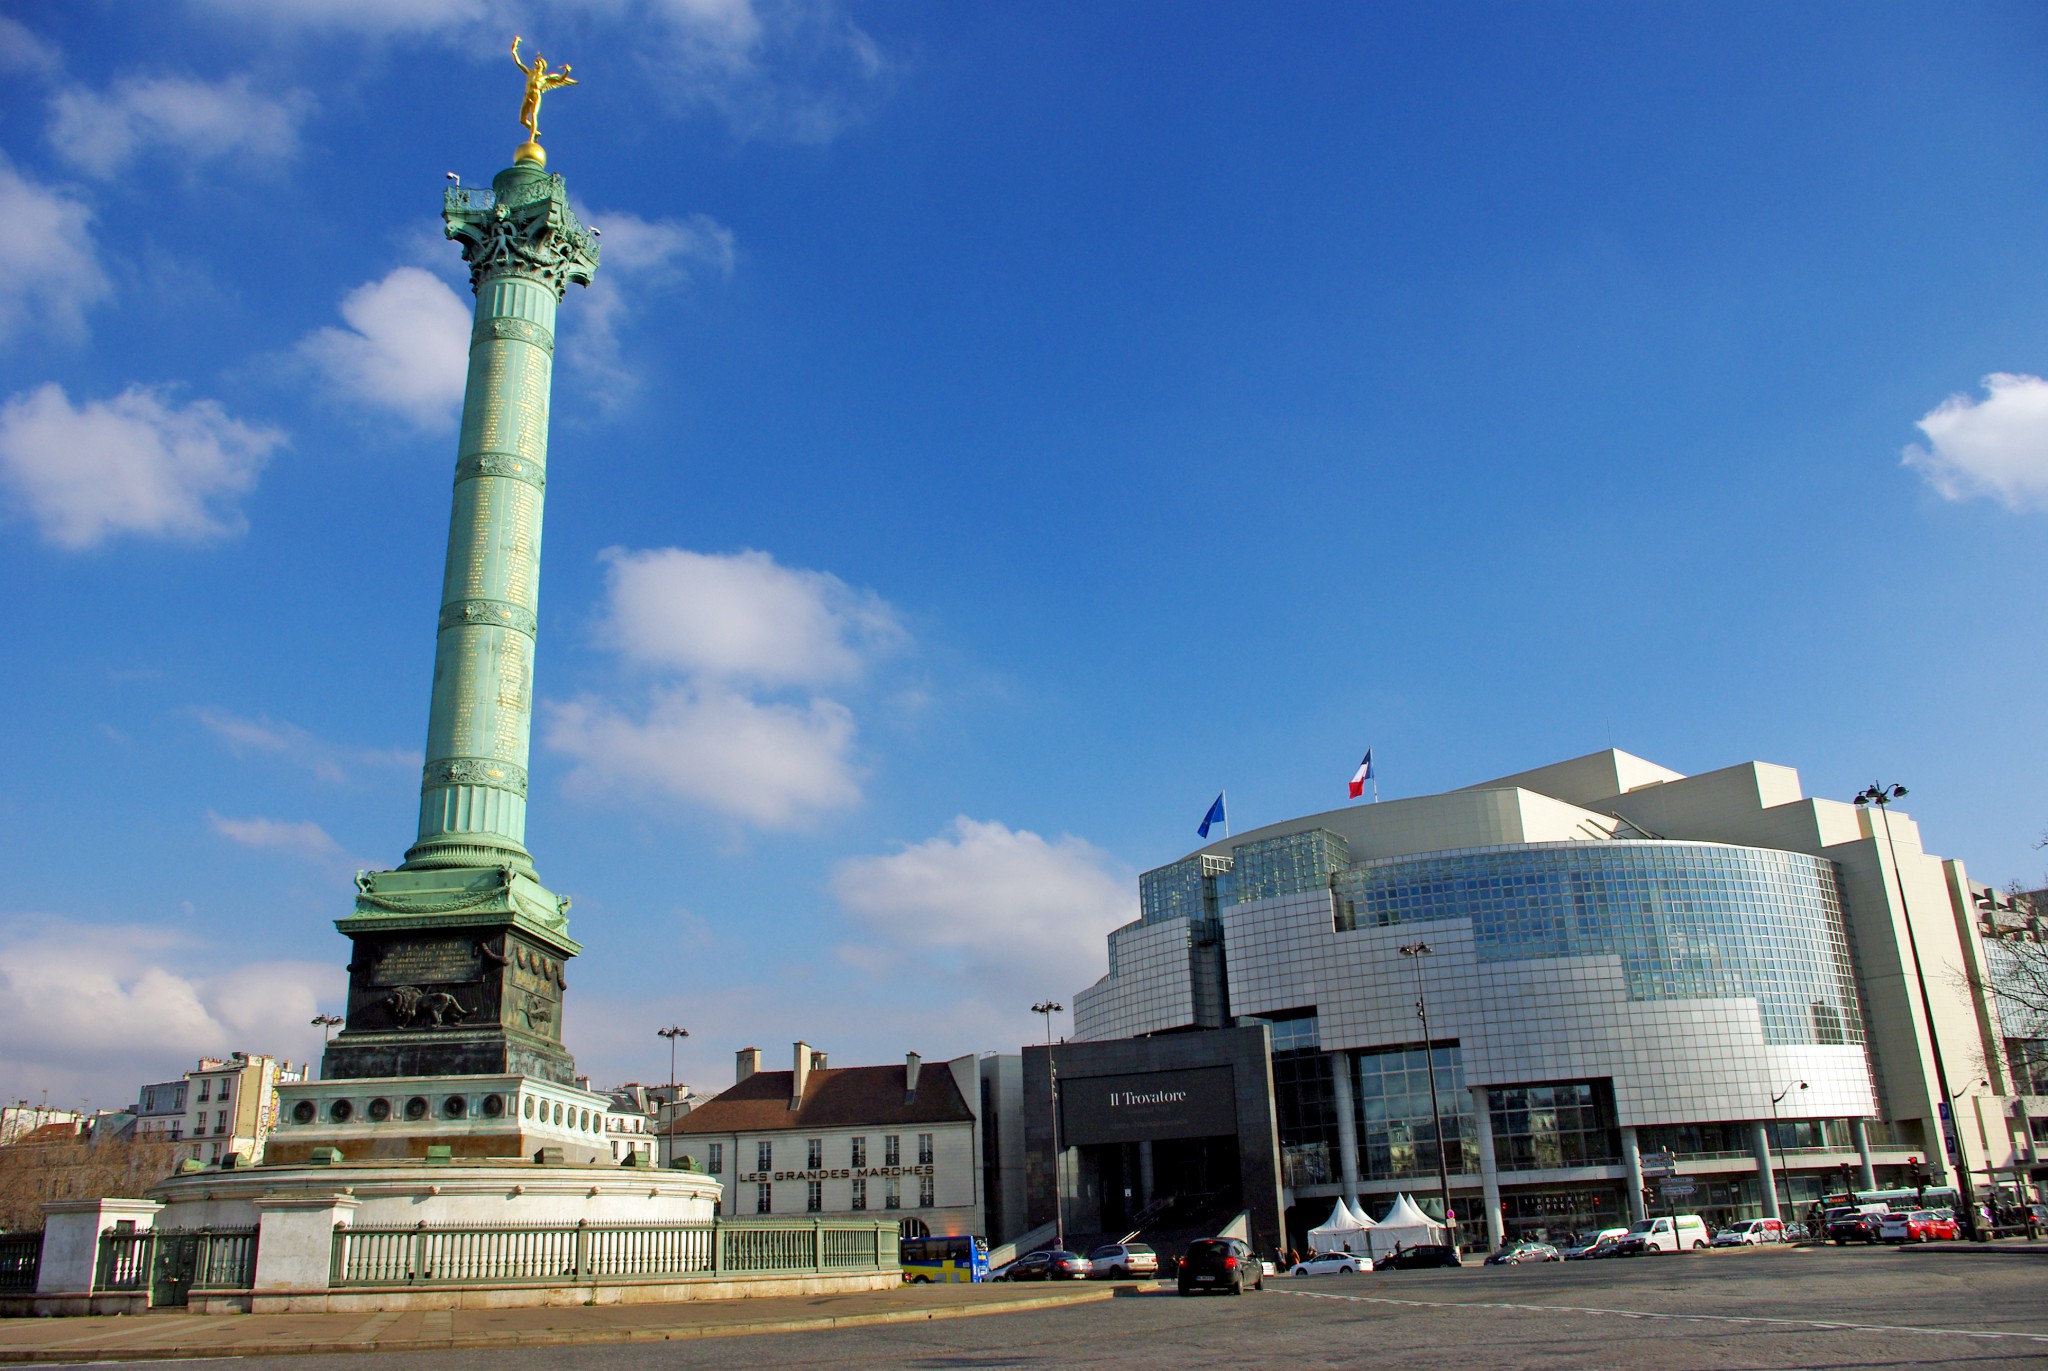 The monuments of Place de la Bastille: the column and the opera house © French Moments